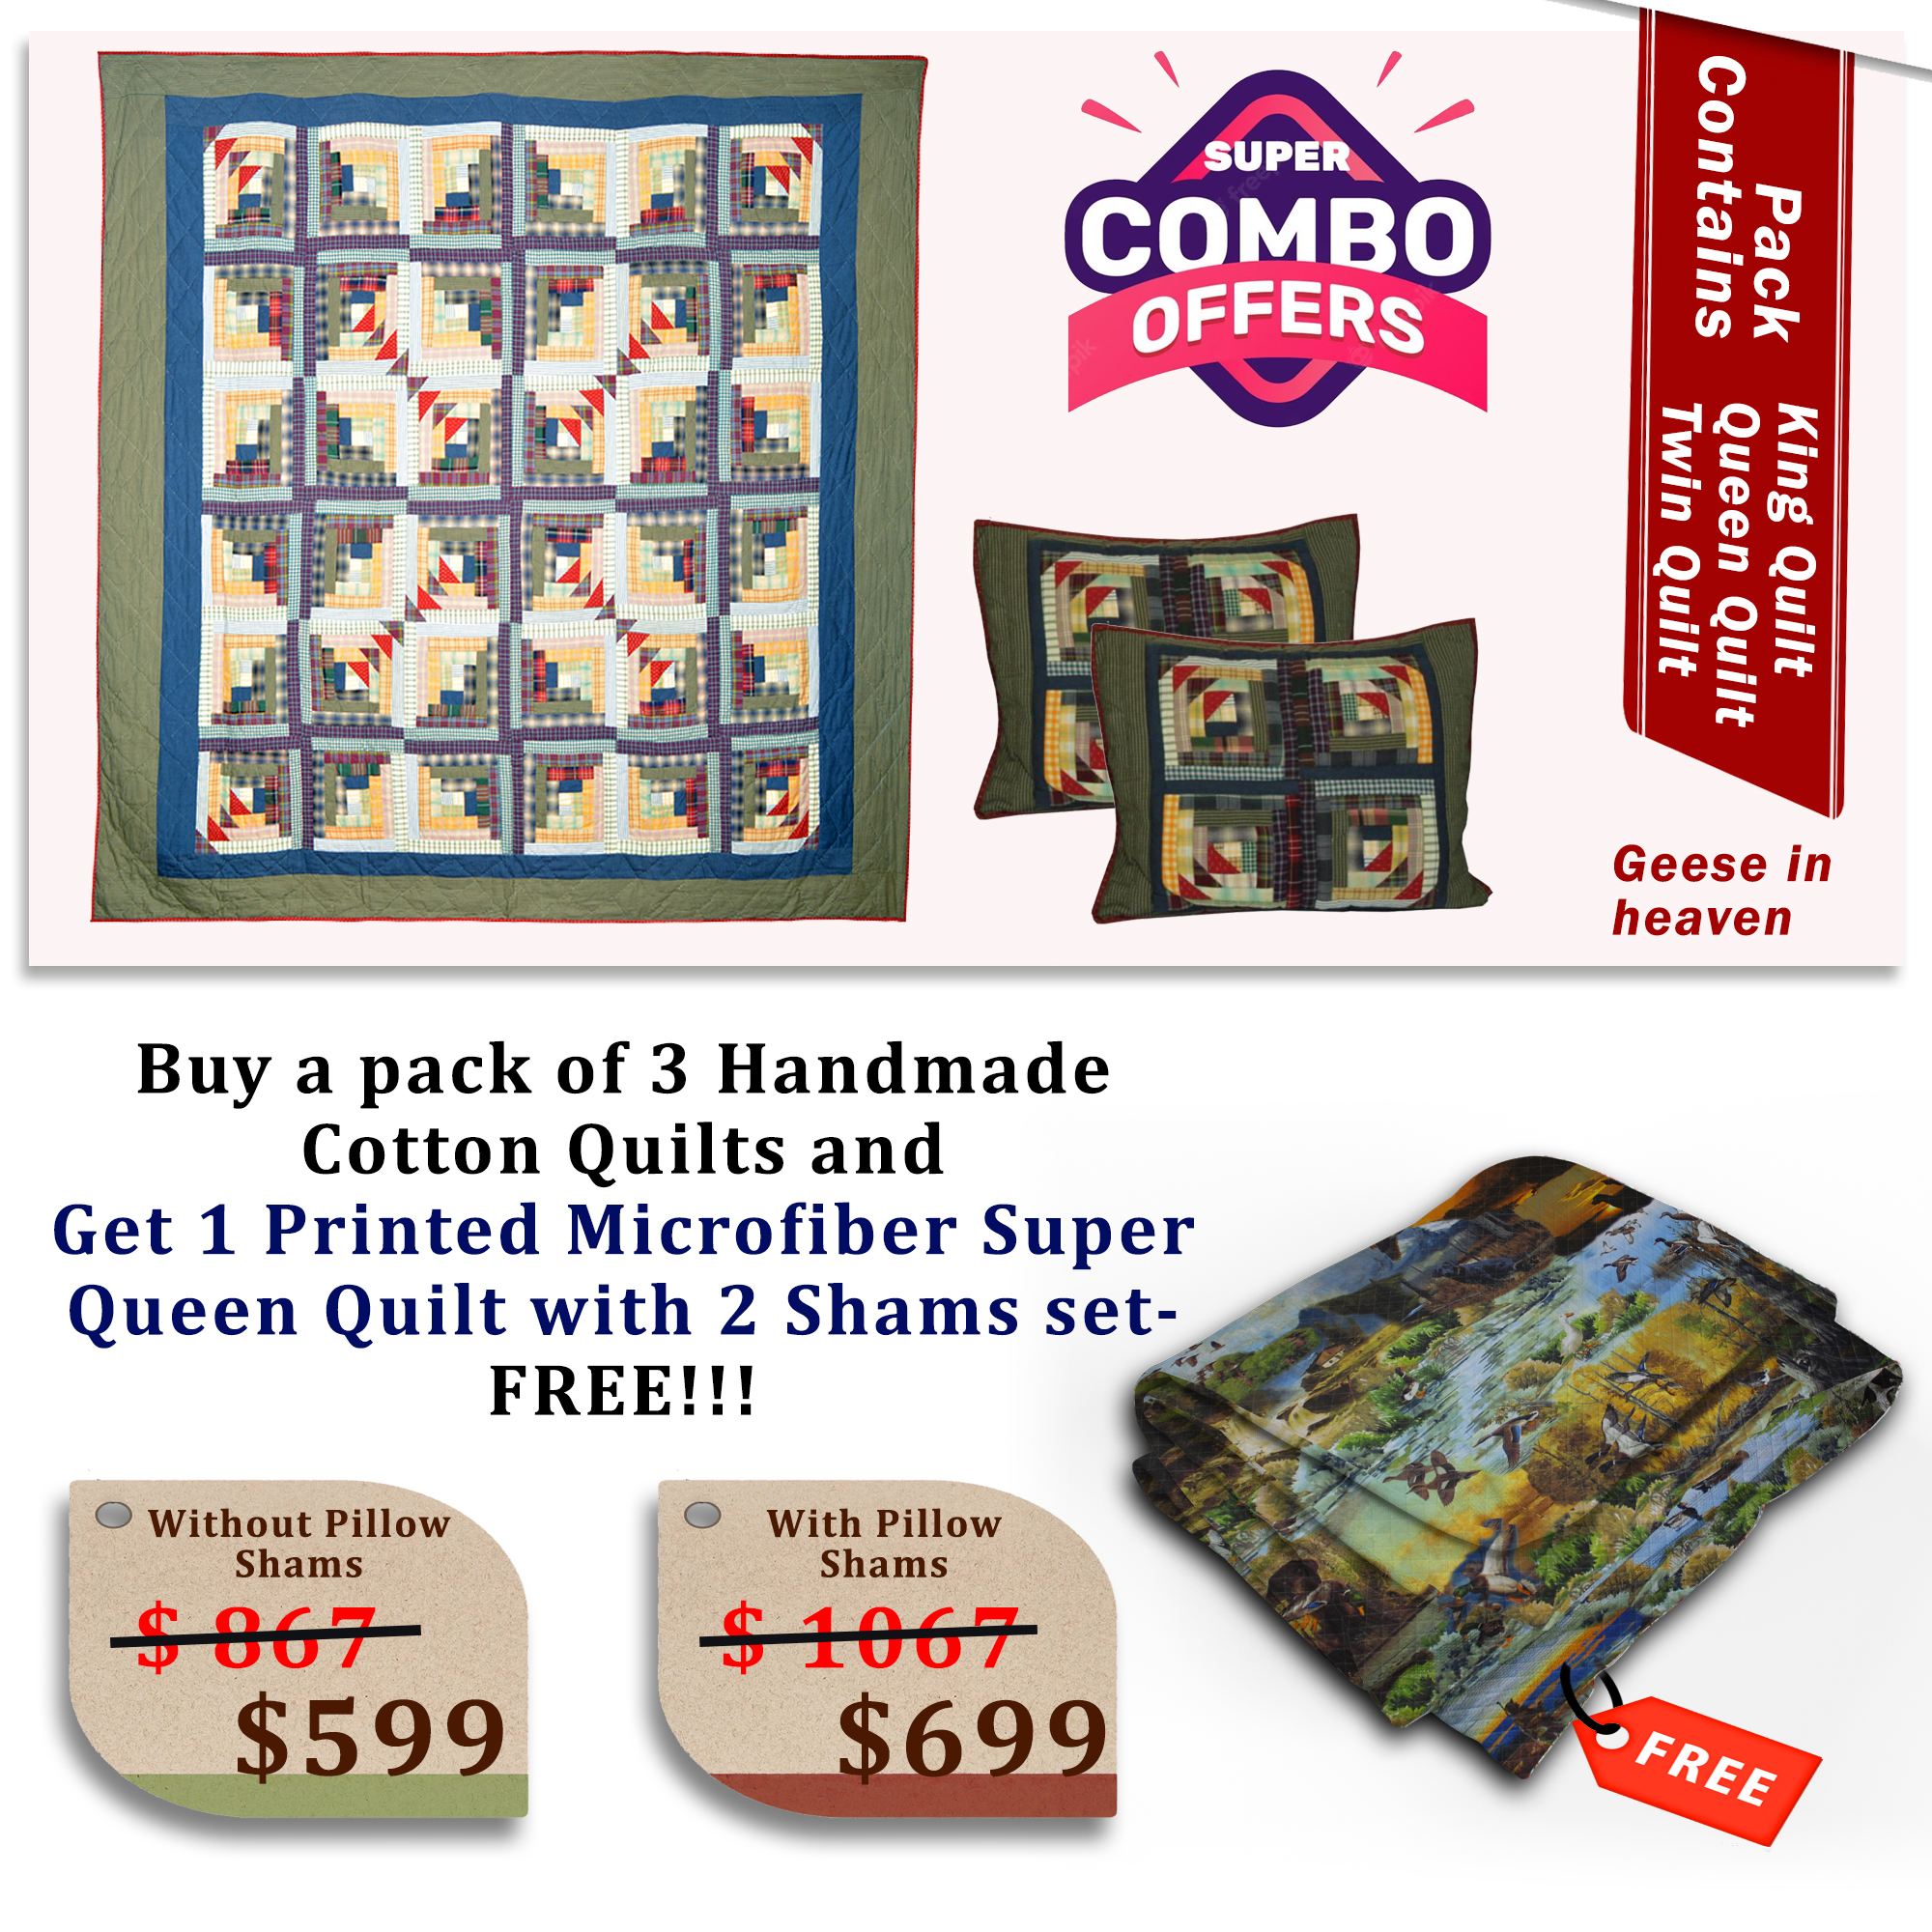 Geese in heaven - Handmade Cotton quilts | Buy 3 cotton quilts and get 1 Printed Microfiber Super Queen Quilt with 2 Shams set FREE